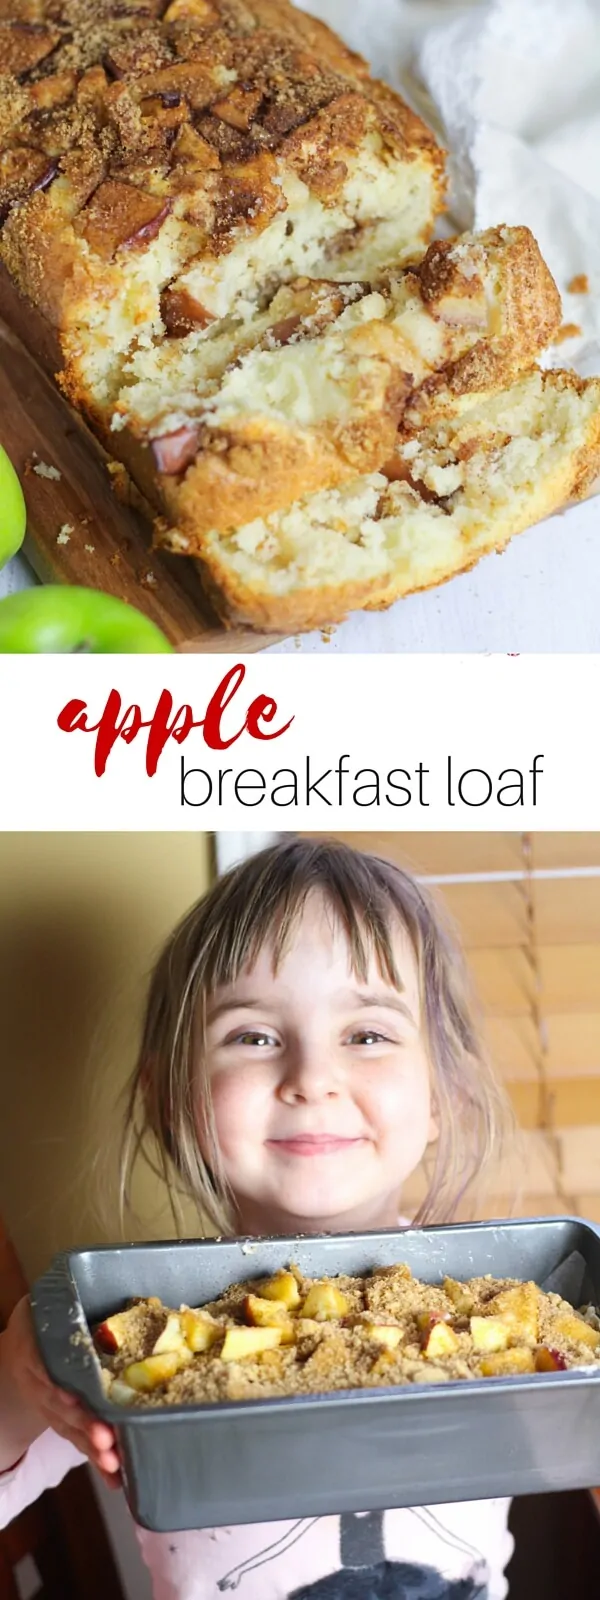 This apple breakfast loaf recipe is the perfect recipe for kids to help with in the kitchen! Tender, cake-like bread with cinnamon-brown sugar and real chunks of apple mixed in - the perfect way to start your day.